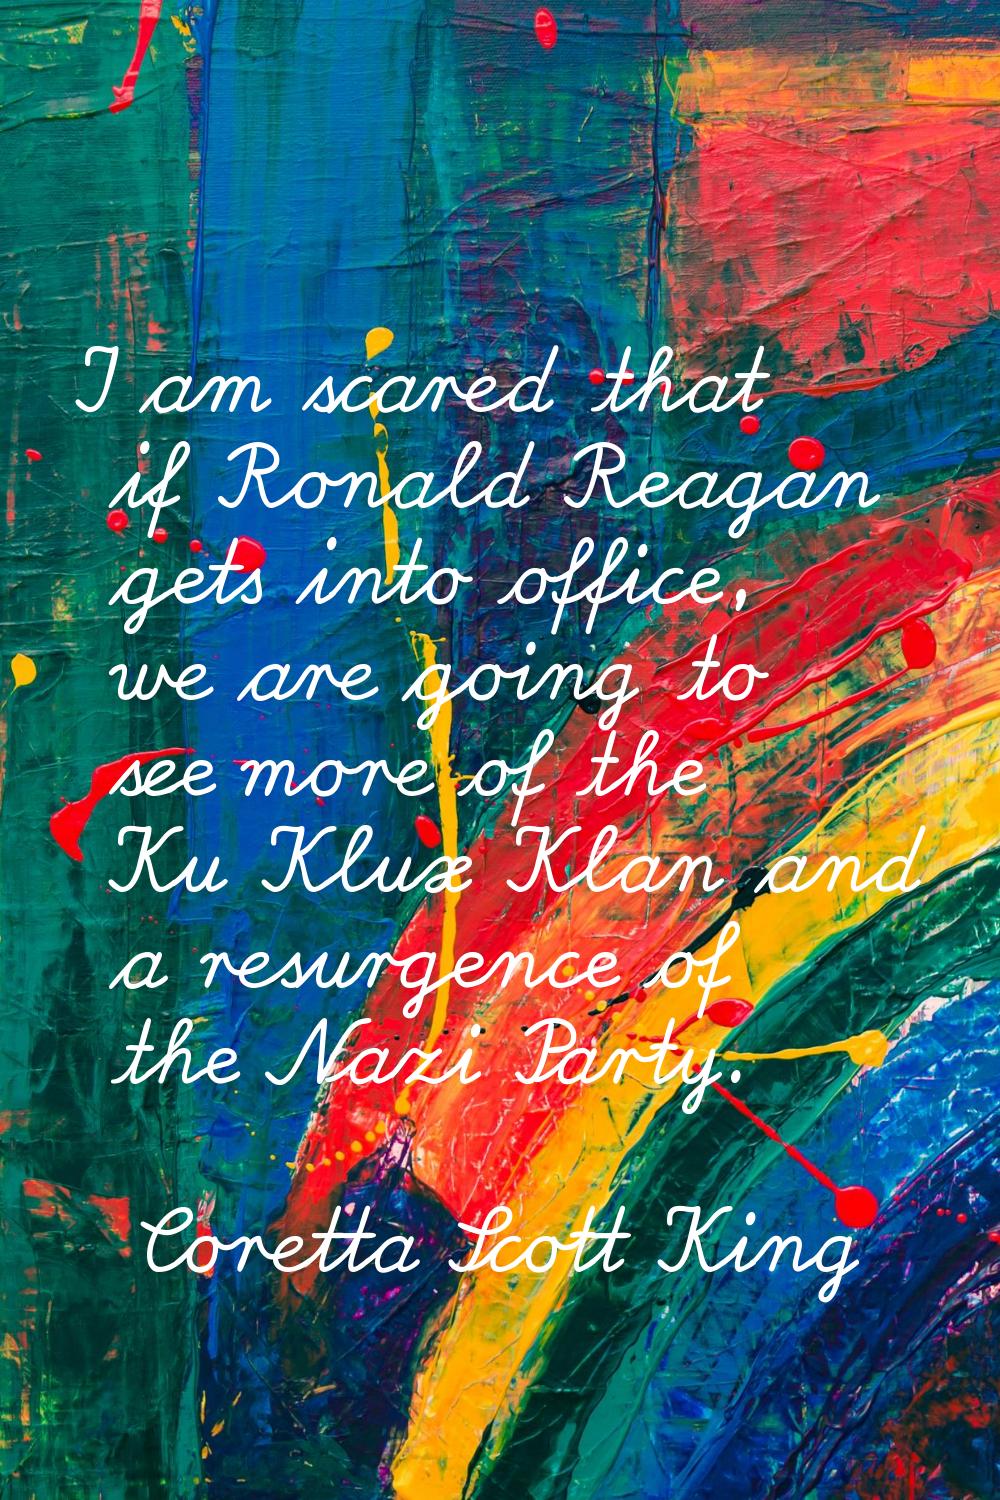 I am scared that if Ronald Reagan gets into office, we are going to see more of the Ku Klux Klan an